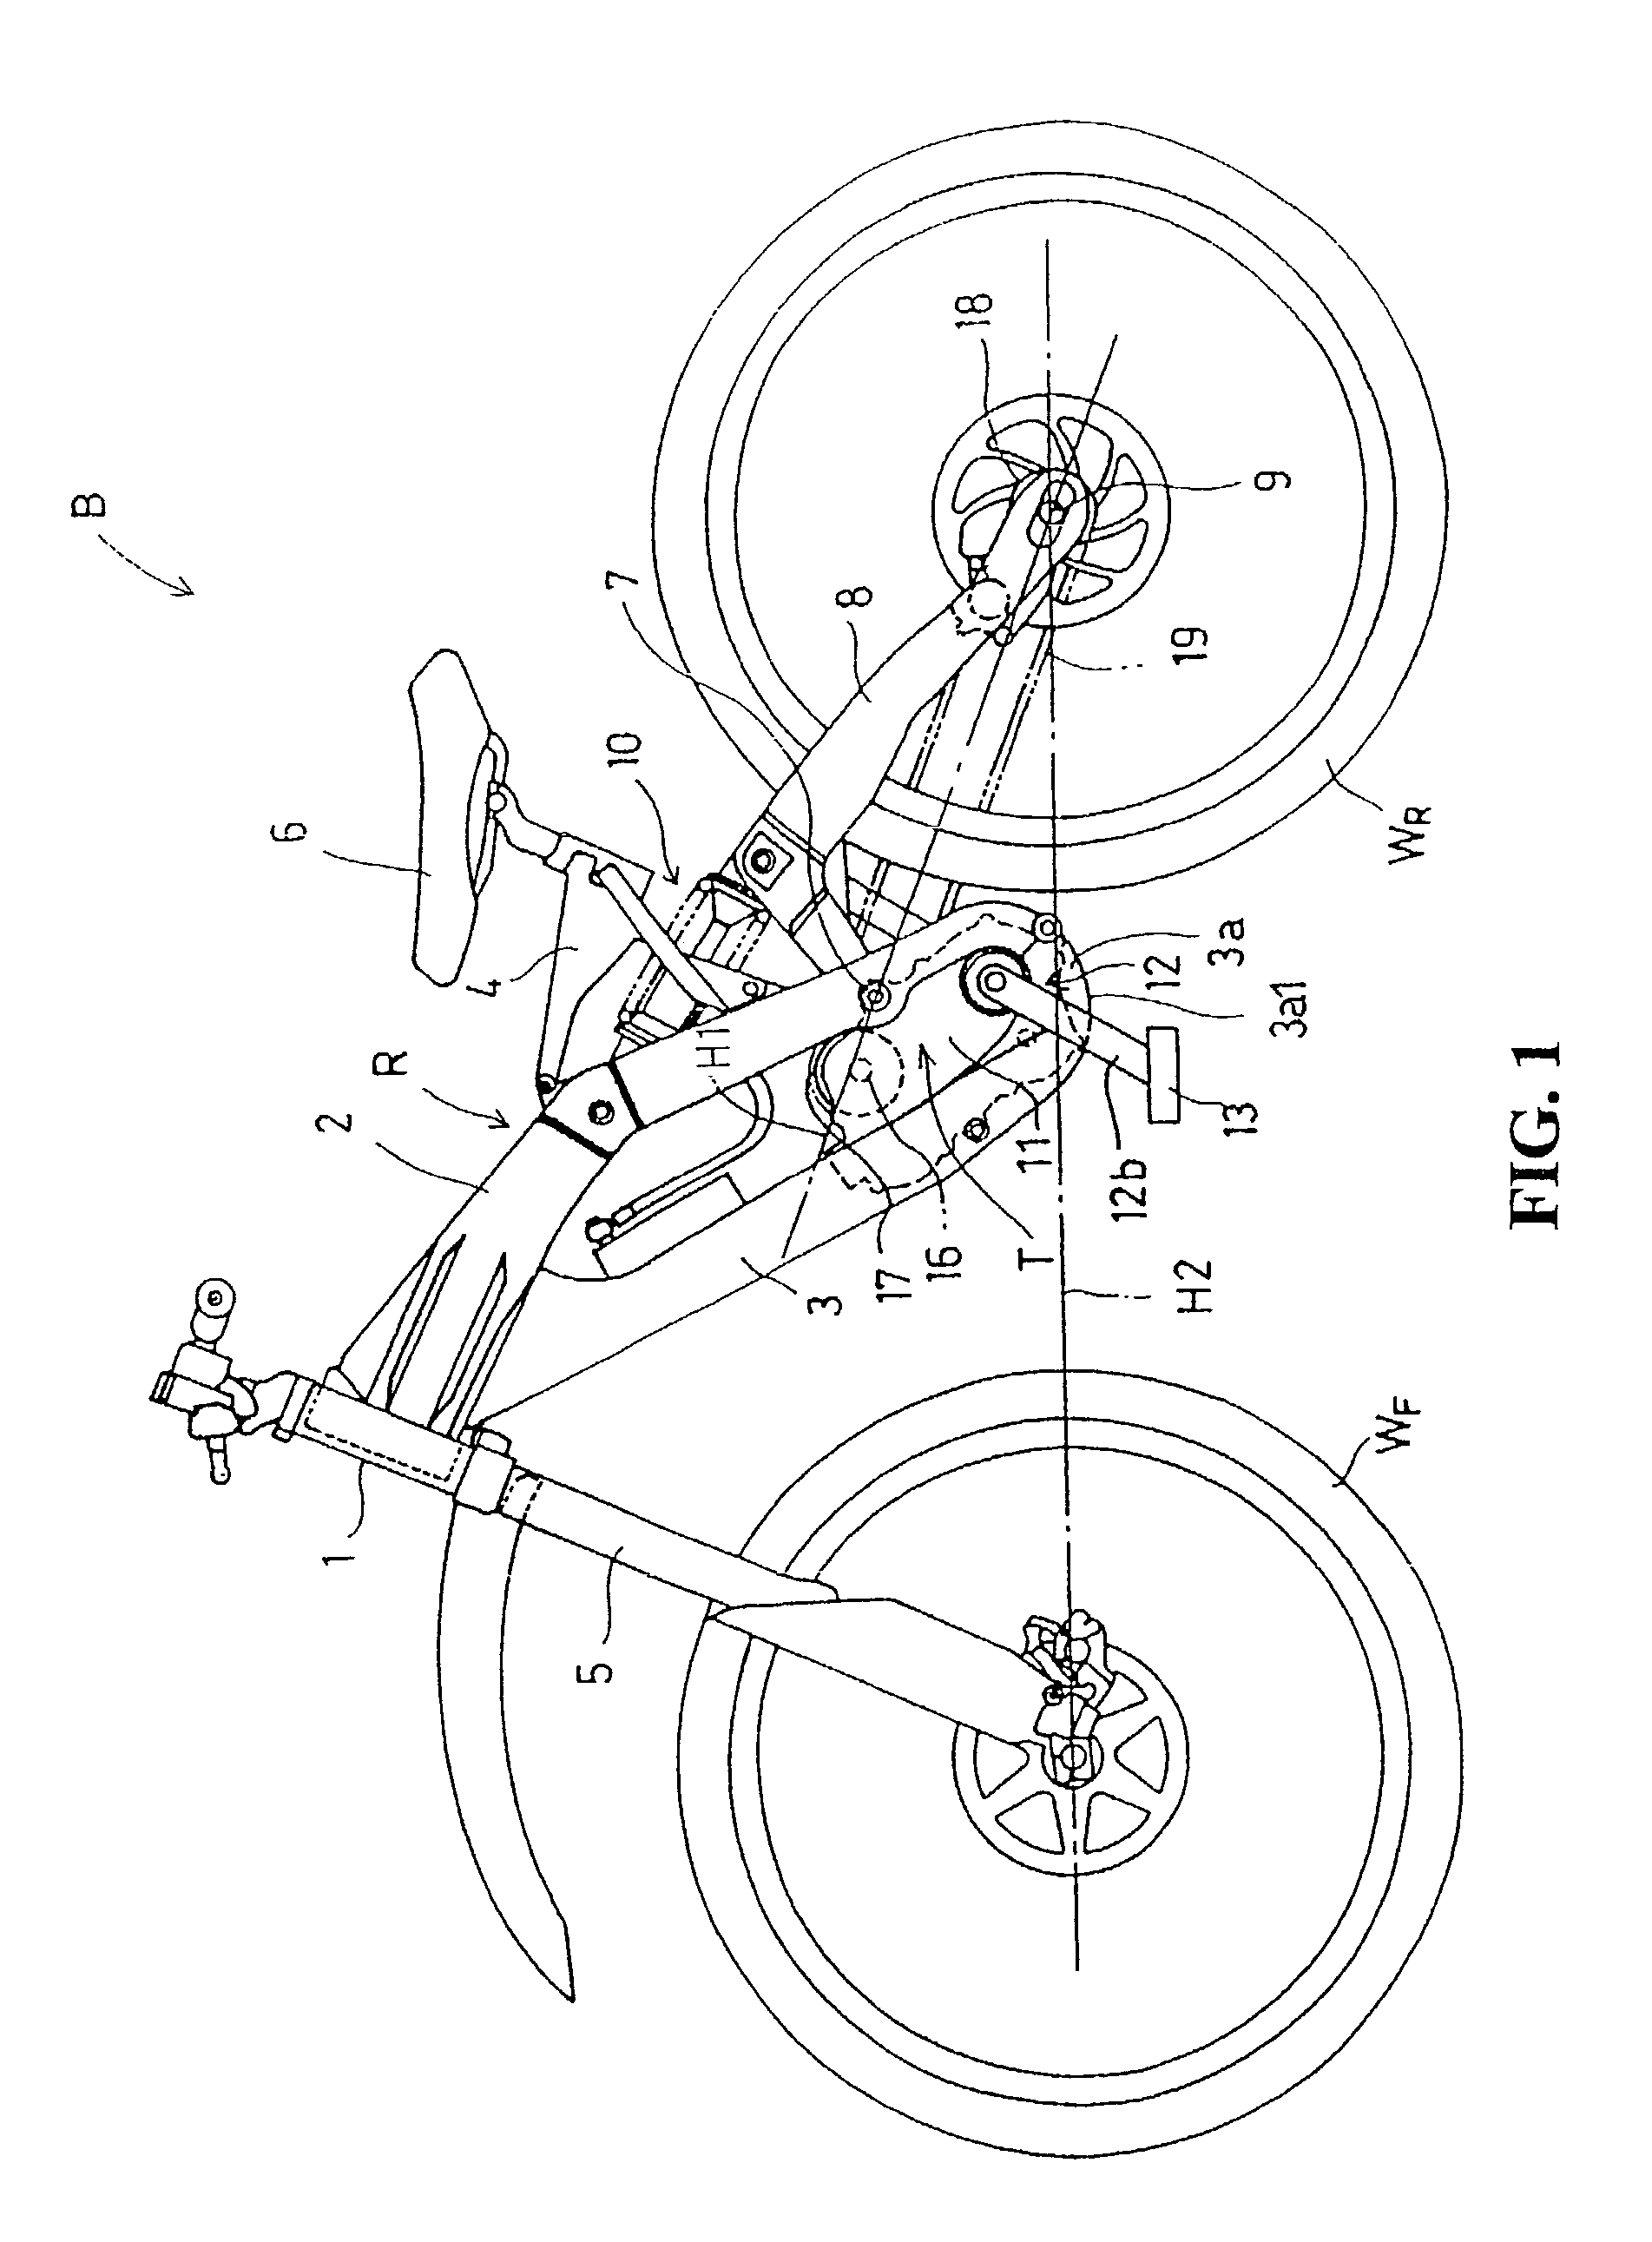 Continuously variable transmission for bicycles